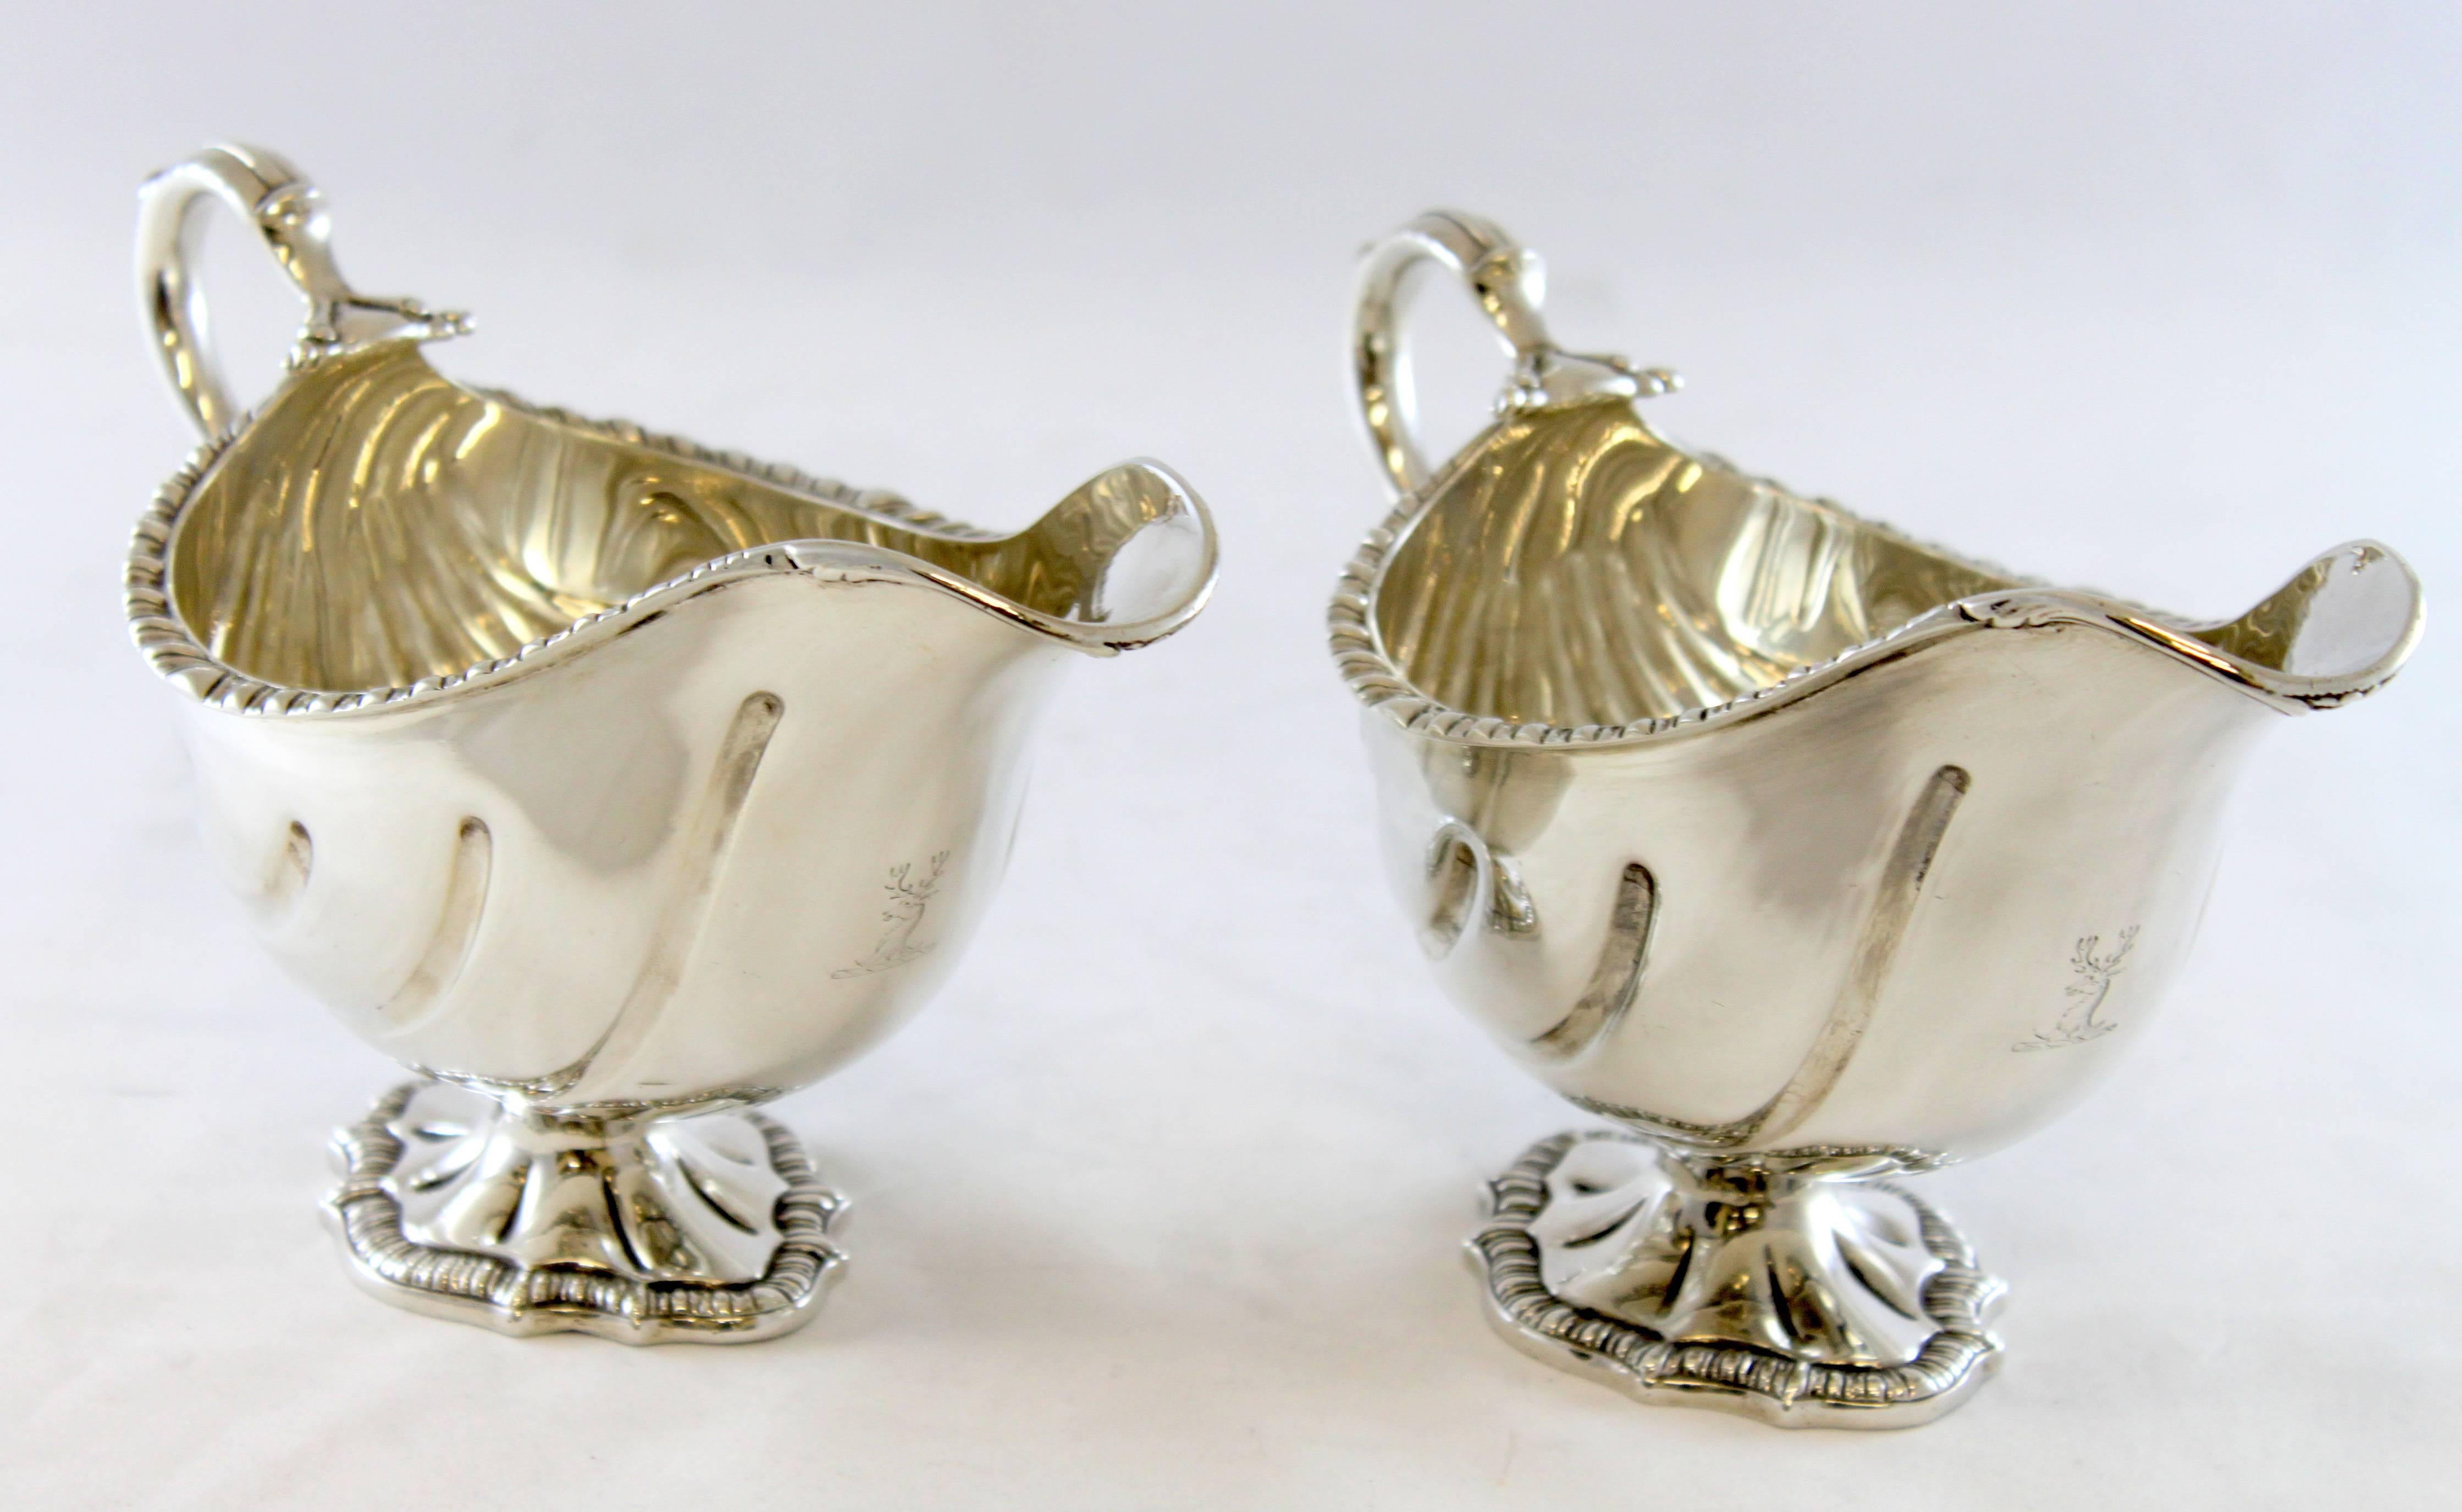 British Early Edwardian Pair of Sterling Silver Creamers, Carrington & Co, London, 1900